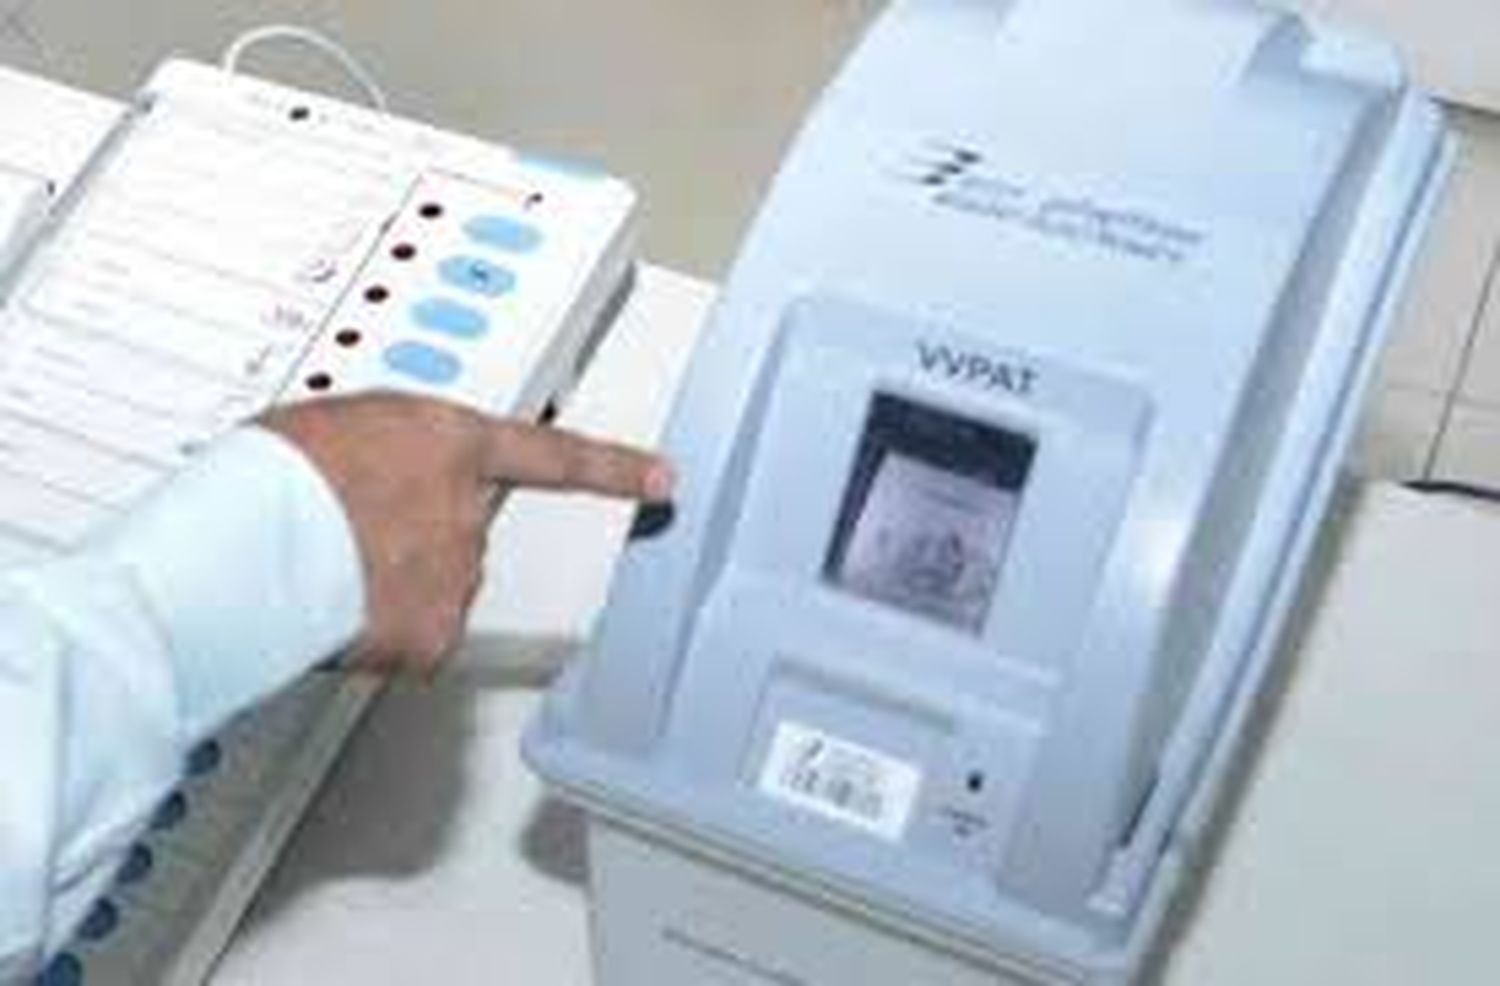 Use of VVPat machine in election